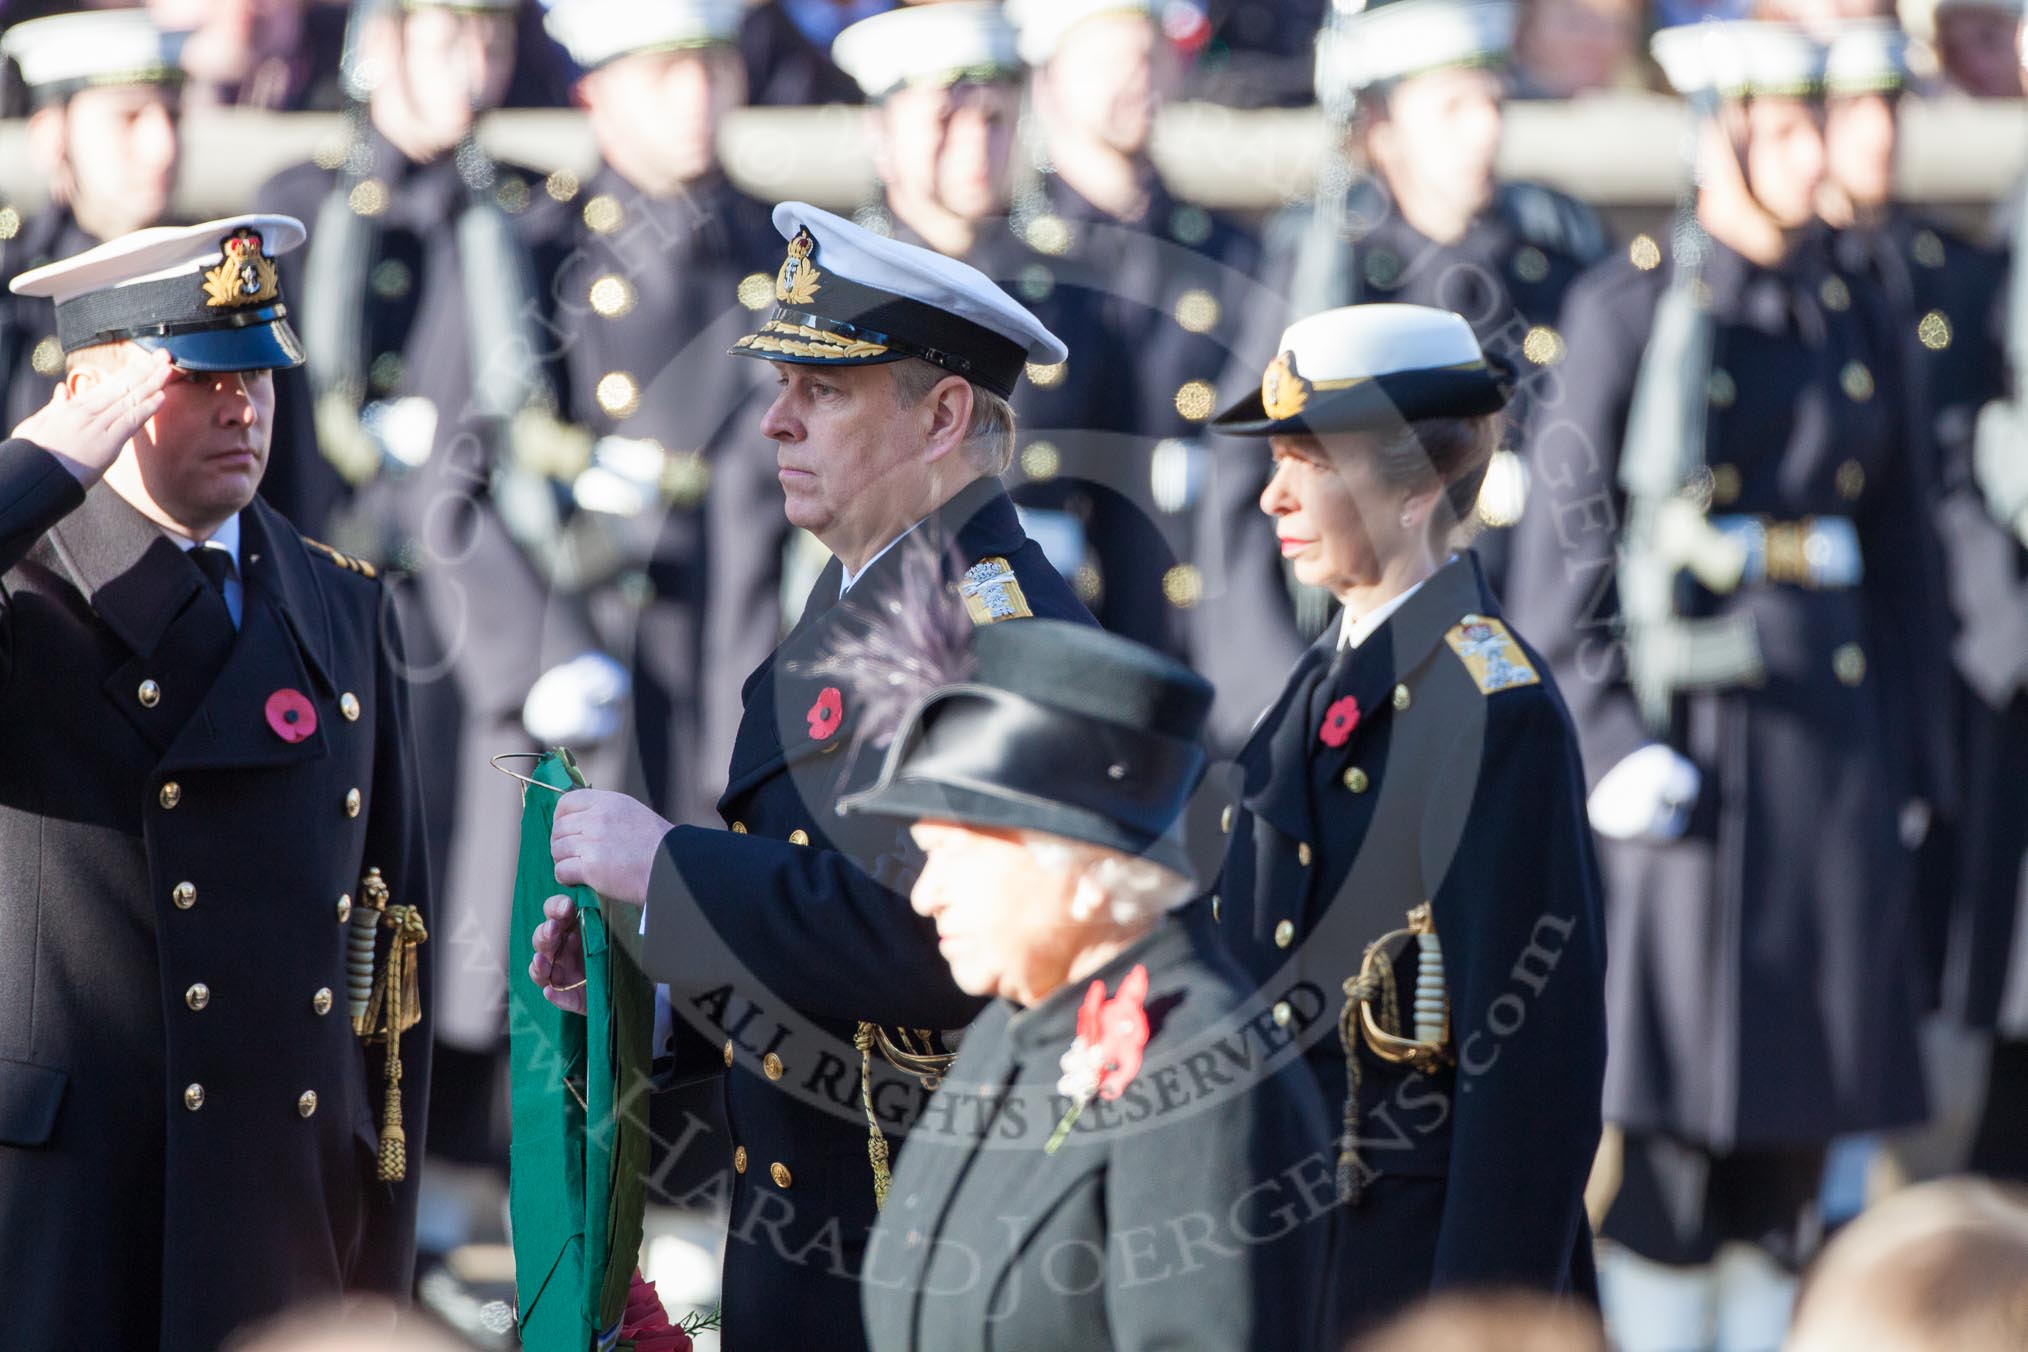 HRH The Duke of York, having received his wreath from his Equerry, Lieutenant Commander Michael Hutchinson, Royal Navy. Behind the Duke HRH The Princess Royal, and in the foreground and out of focus HM The Queen.